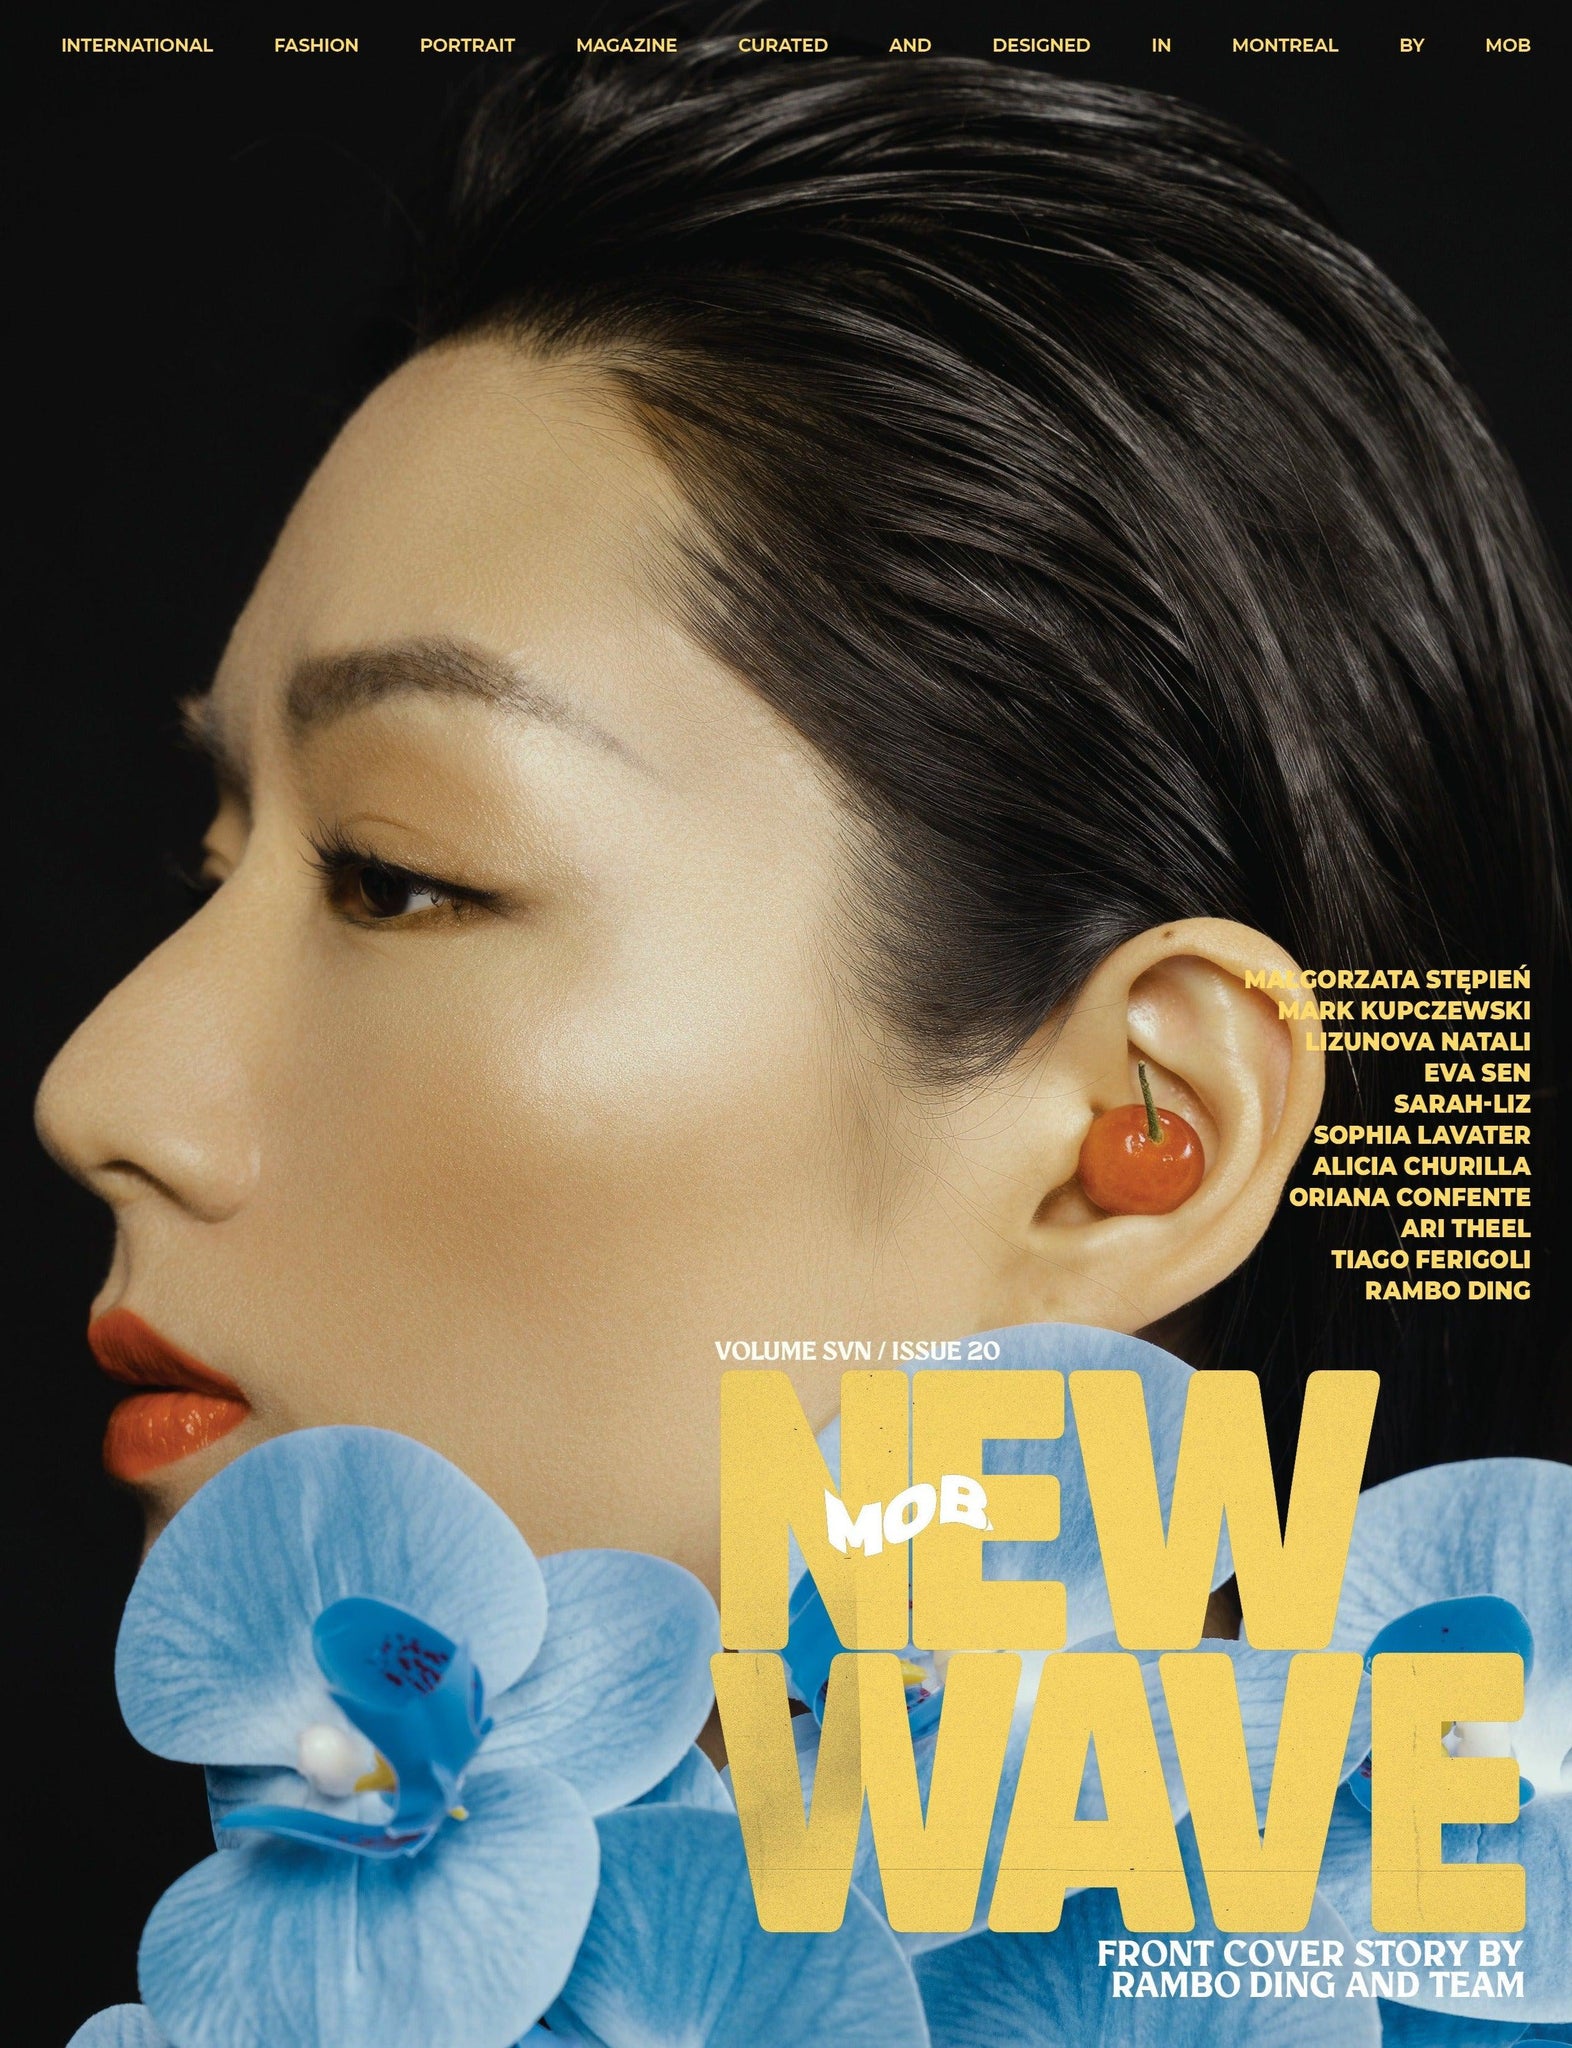 NEW WAVE | VOLUME SEVEN | ISSUE #20 - Mob Journal